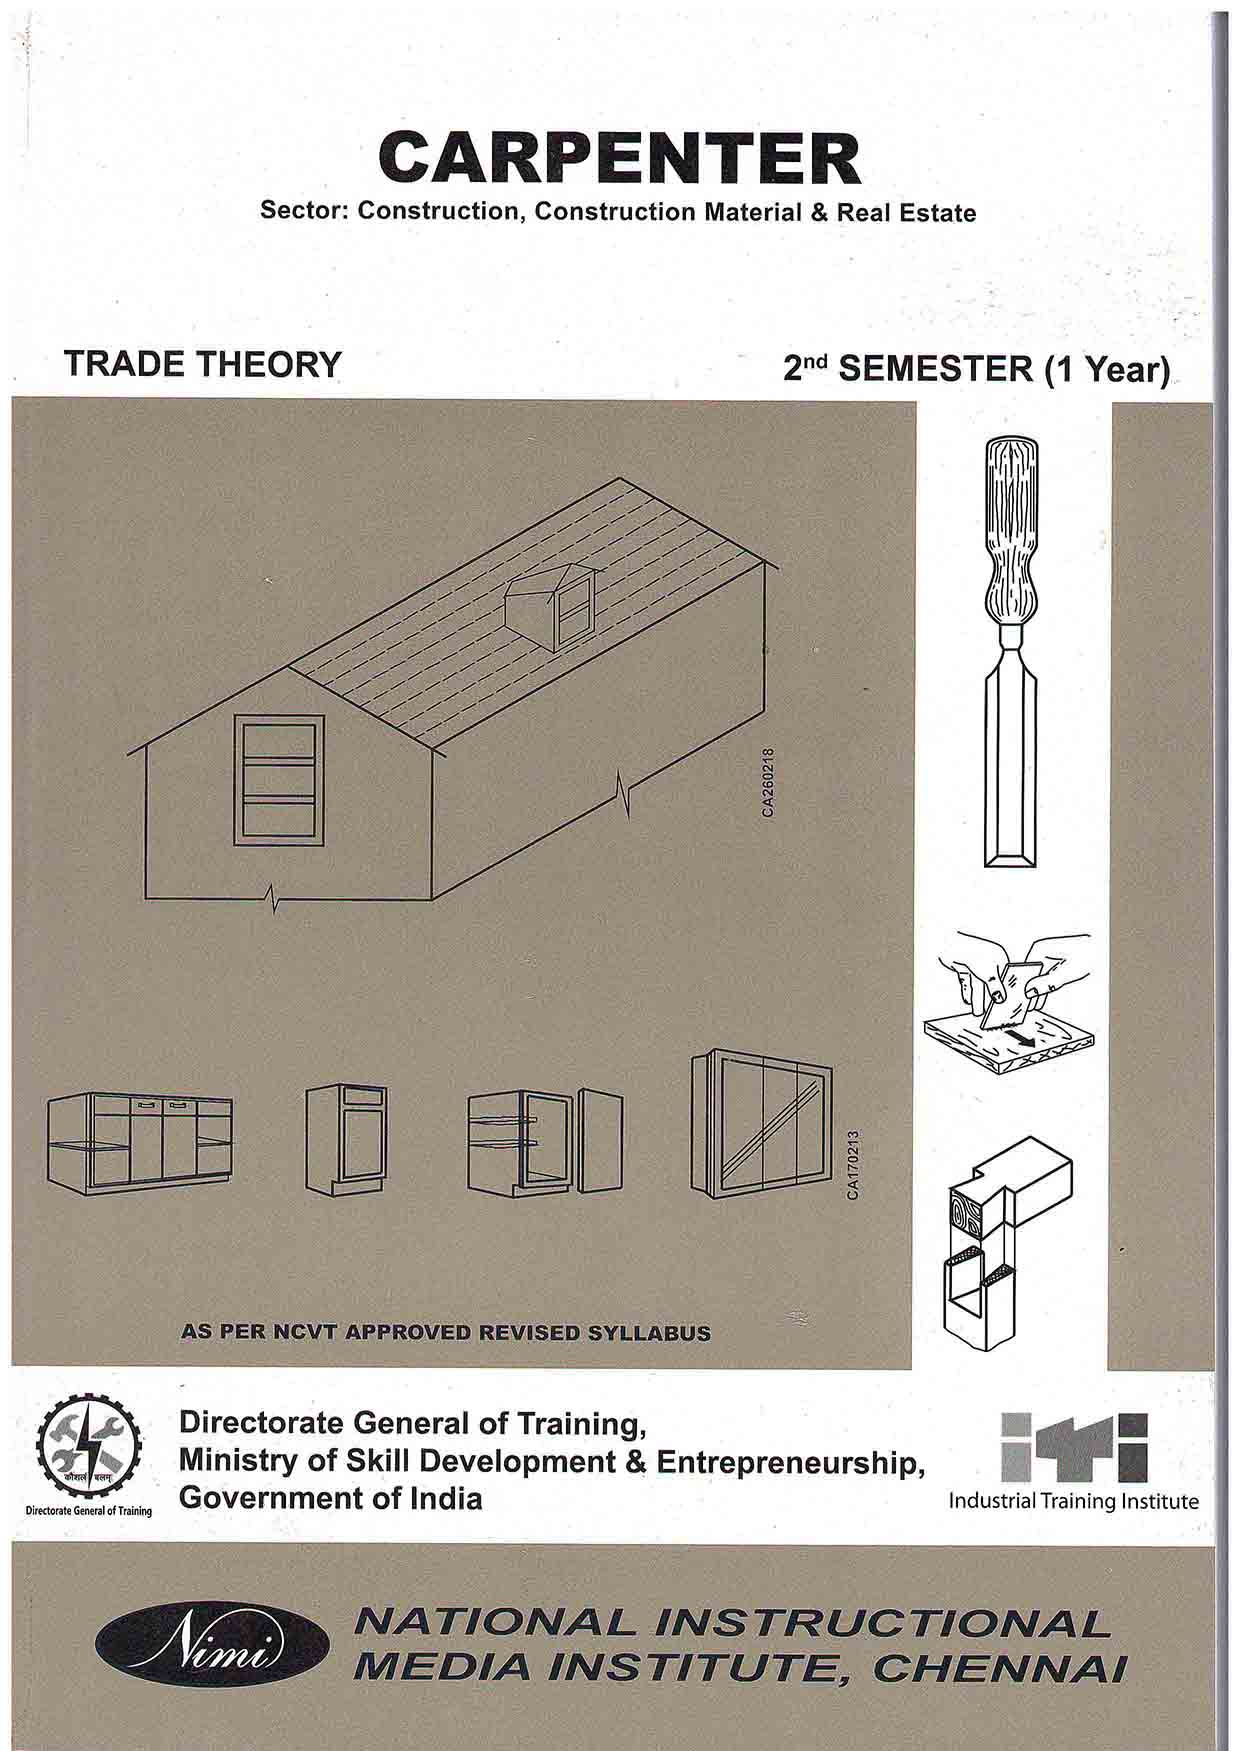 Carpenter (Construction, Construction Material & Real Estate) -Trade Theory- 2nd Semester 1 Year